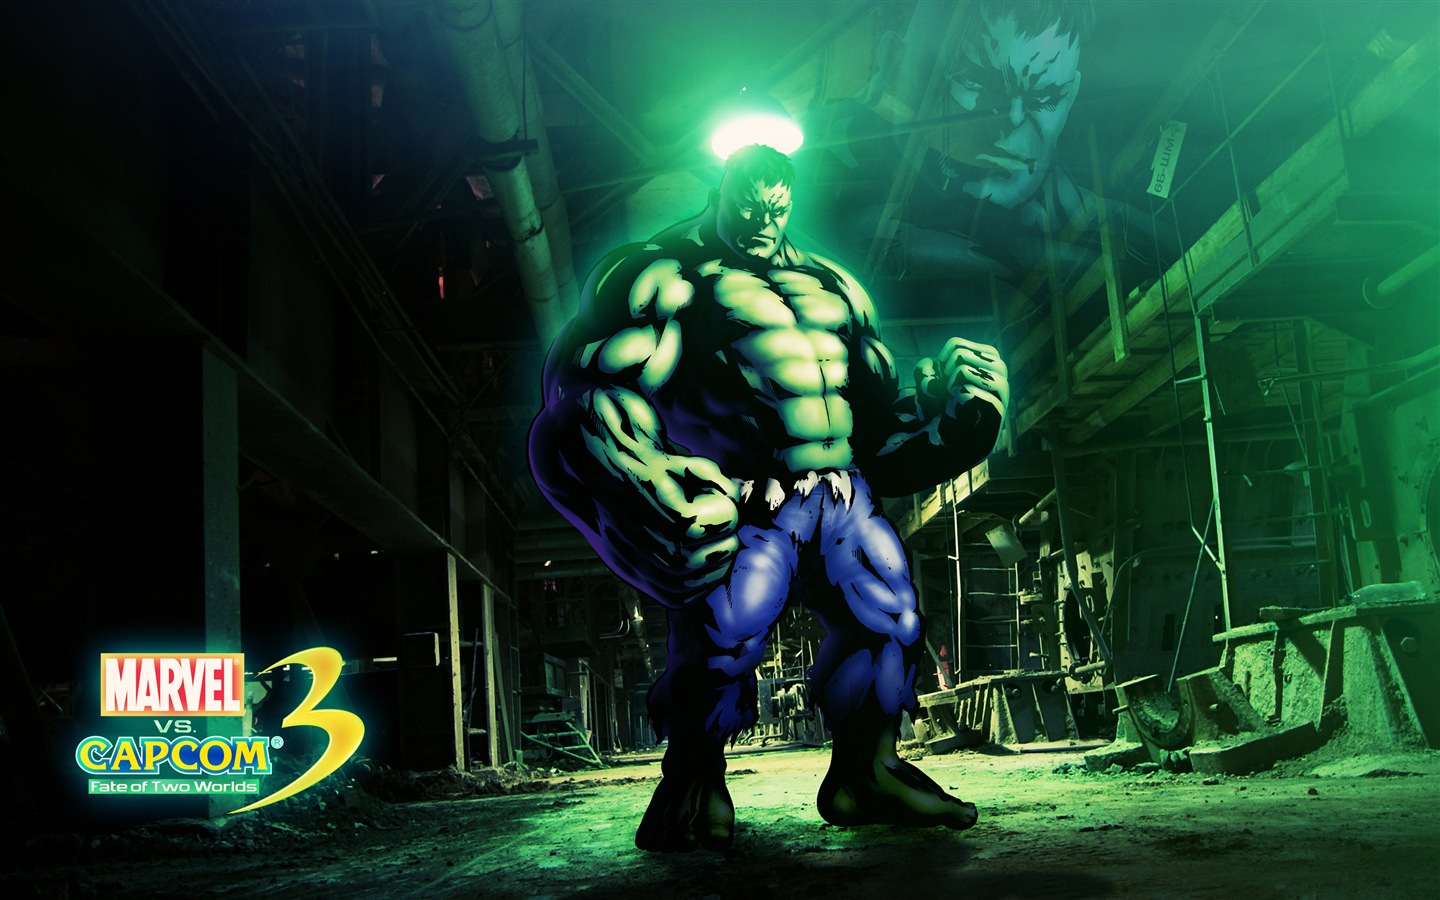 Marvel VS. Capcom 3: Fate of Two Worlds HD game wallpapers #11 - 1440x900